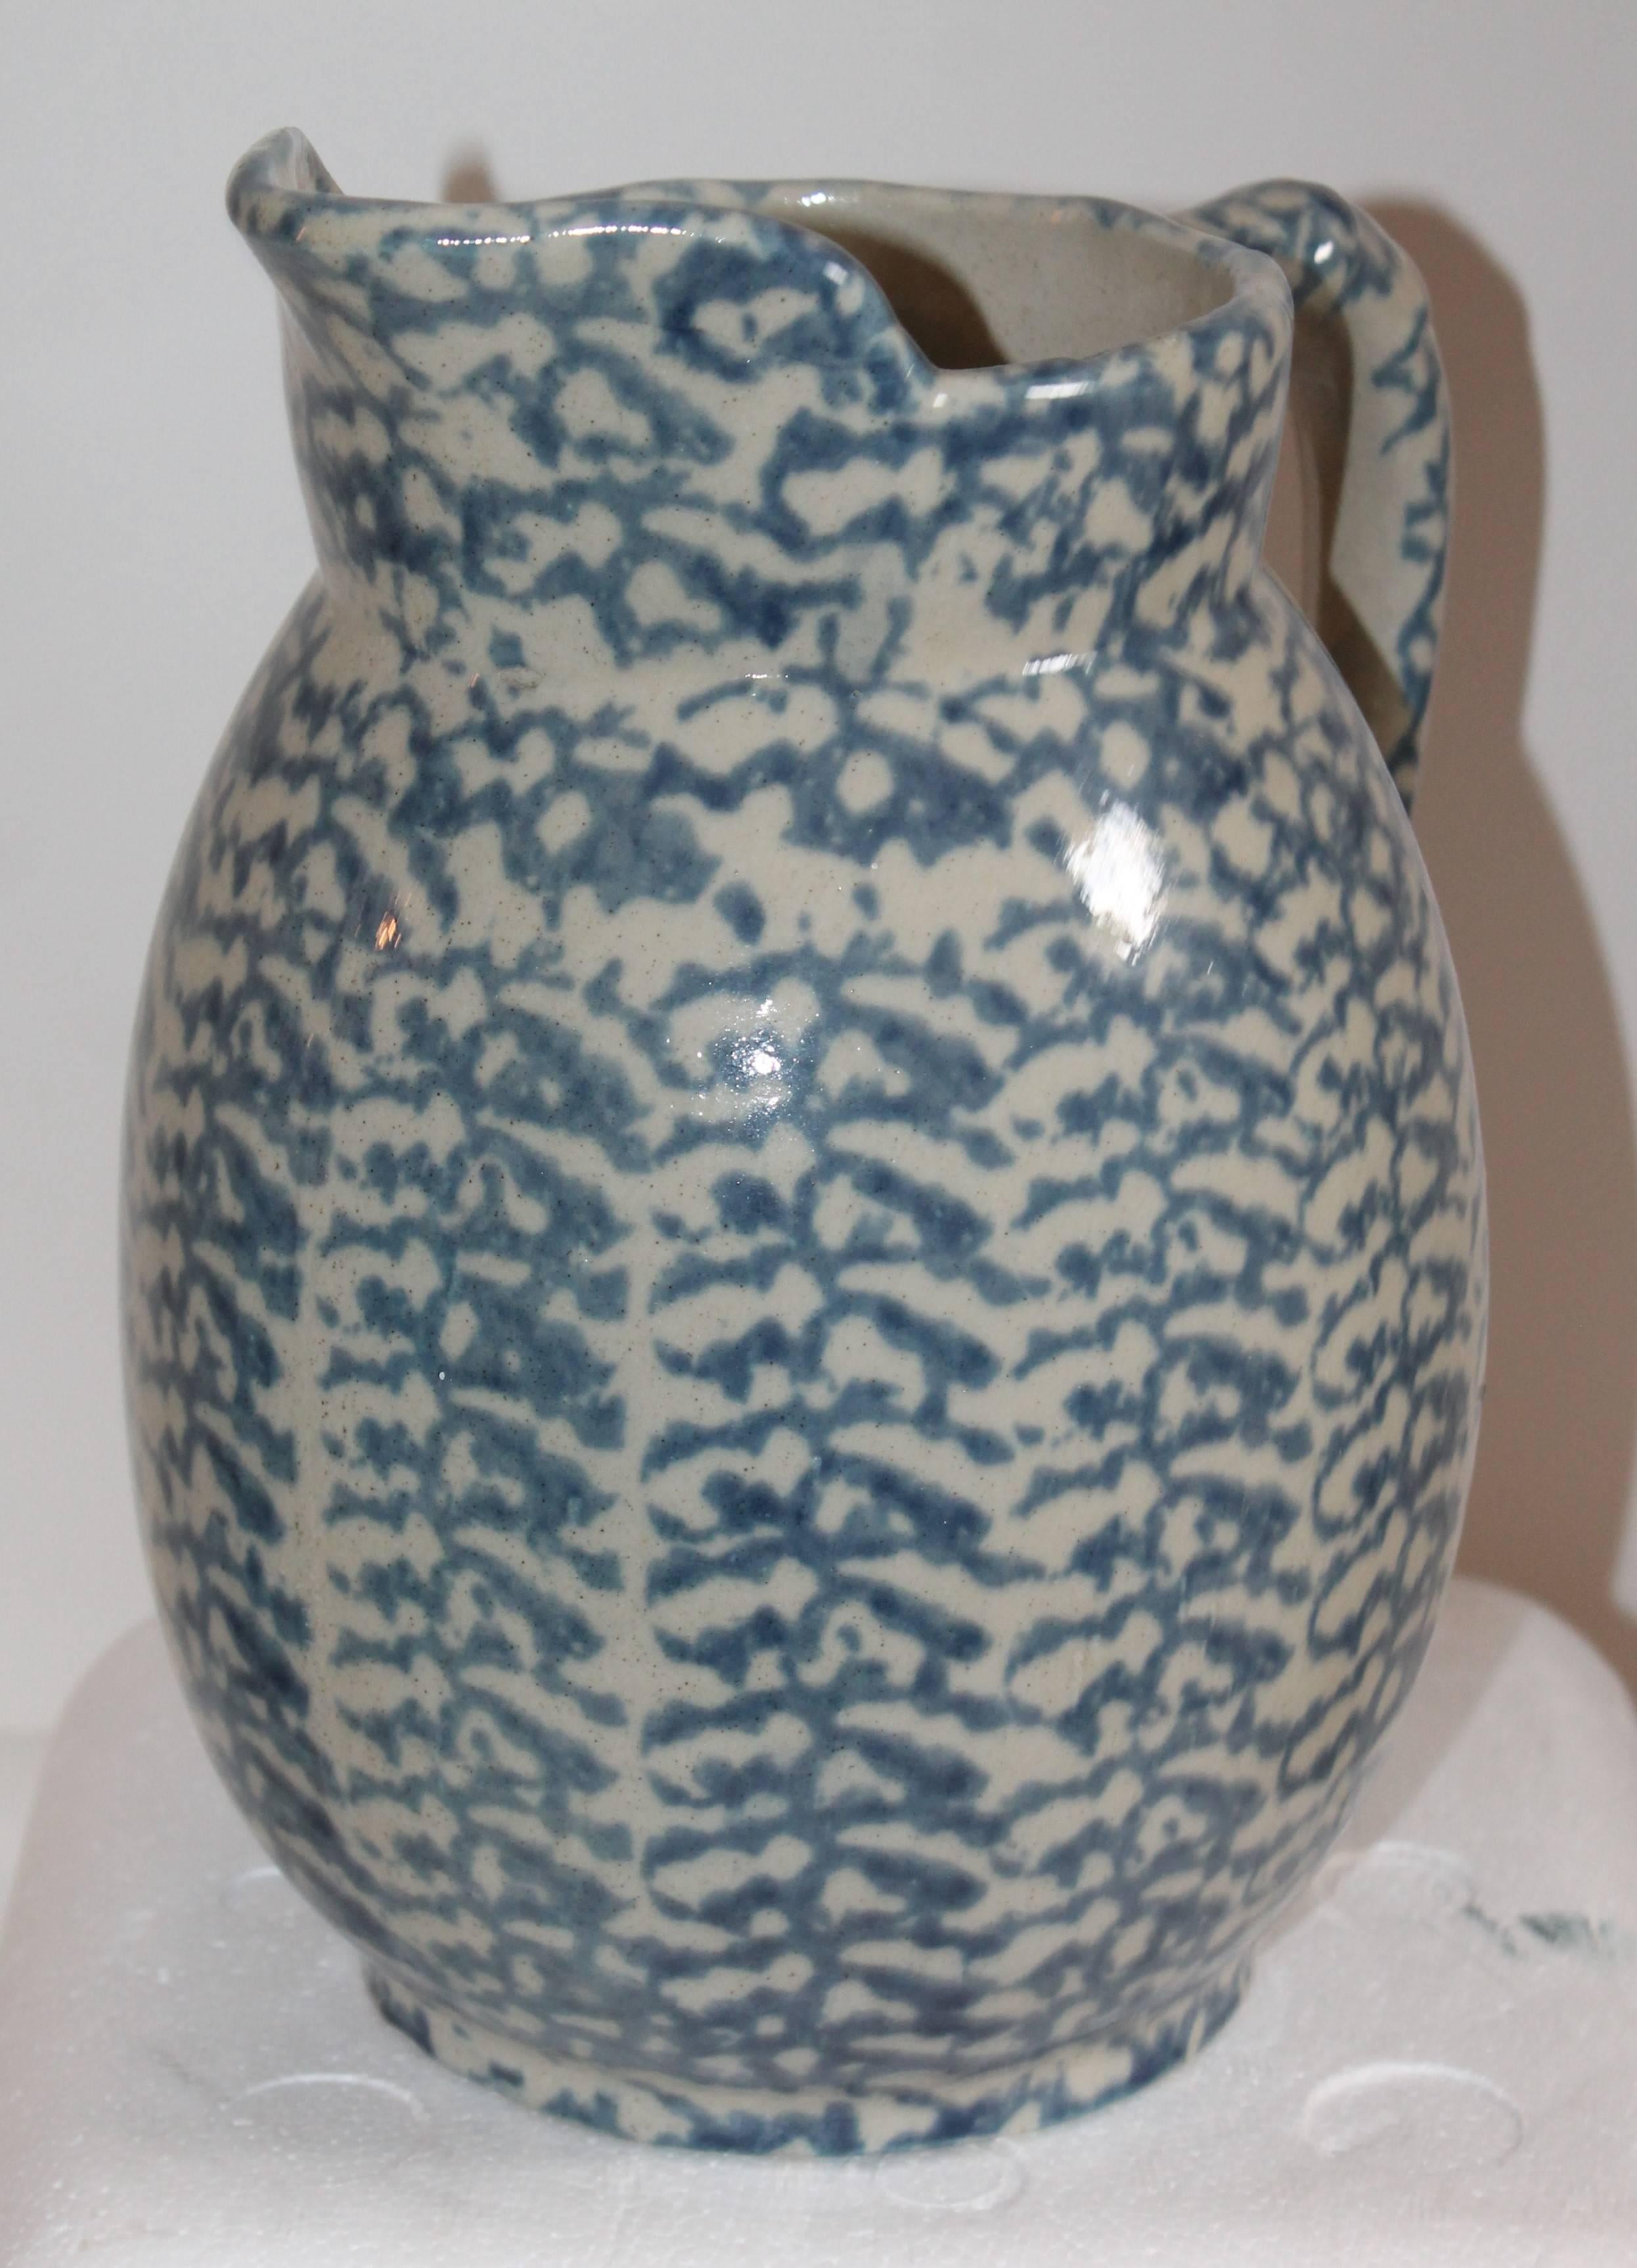 This sponge ware pitcher is most unusual and in very good condition. The surface is more like a salt glaze finish.